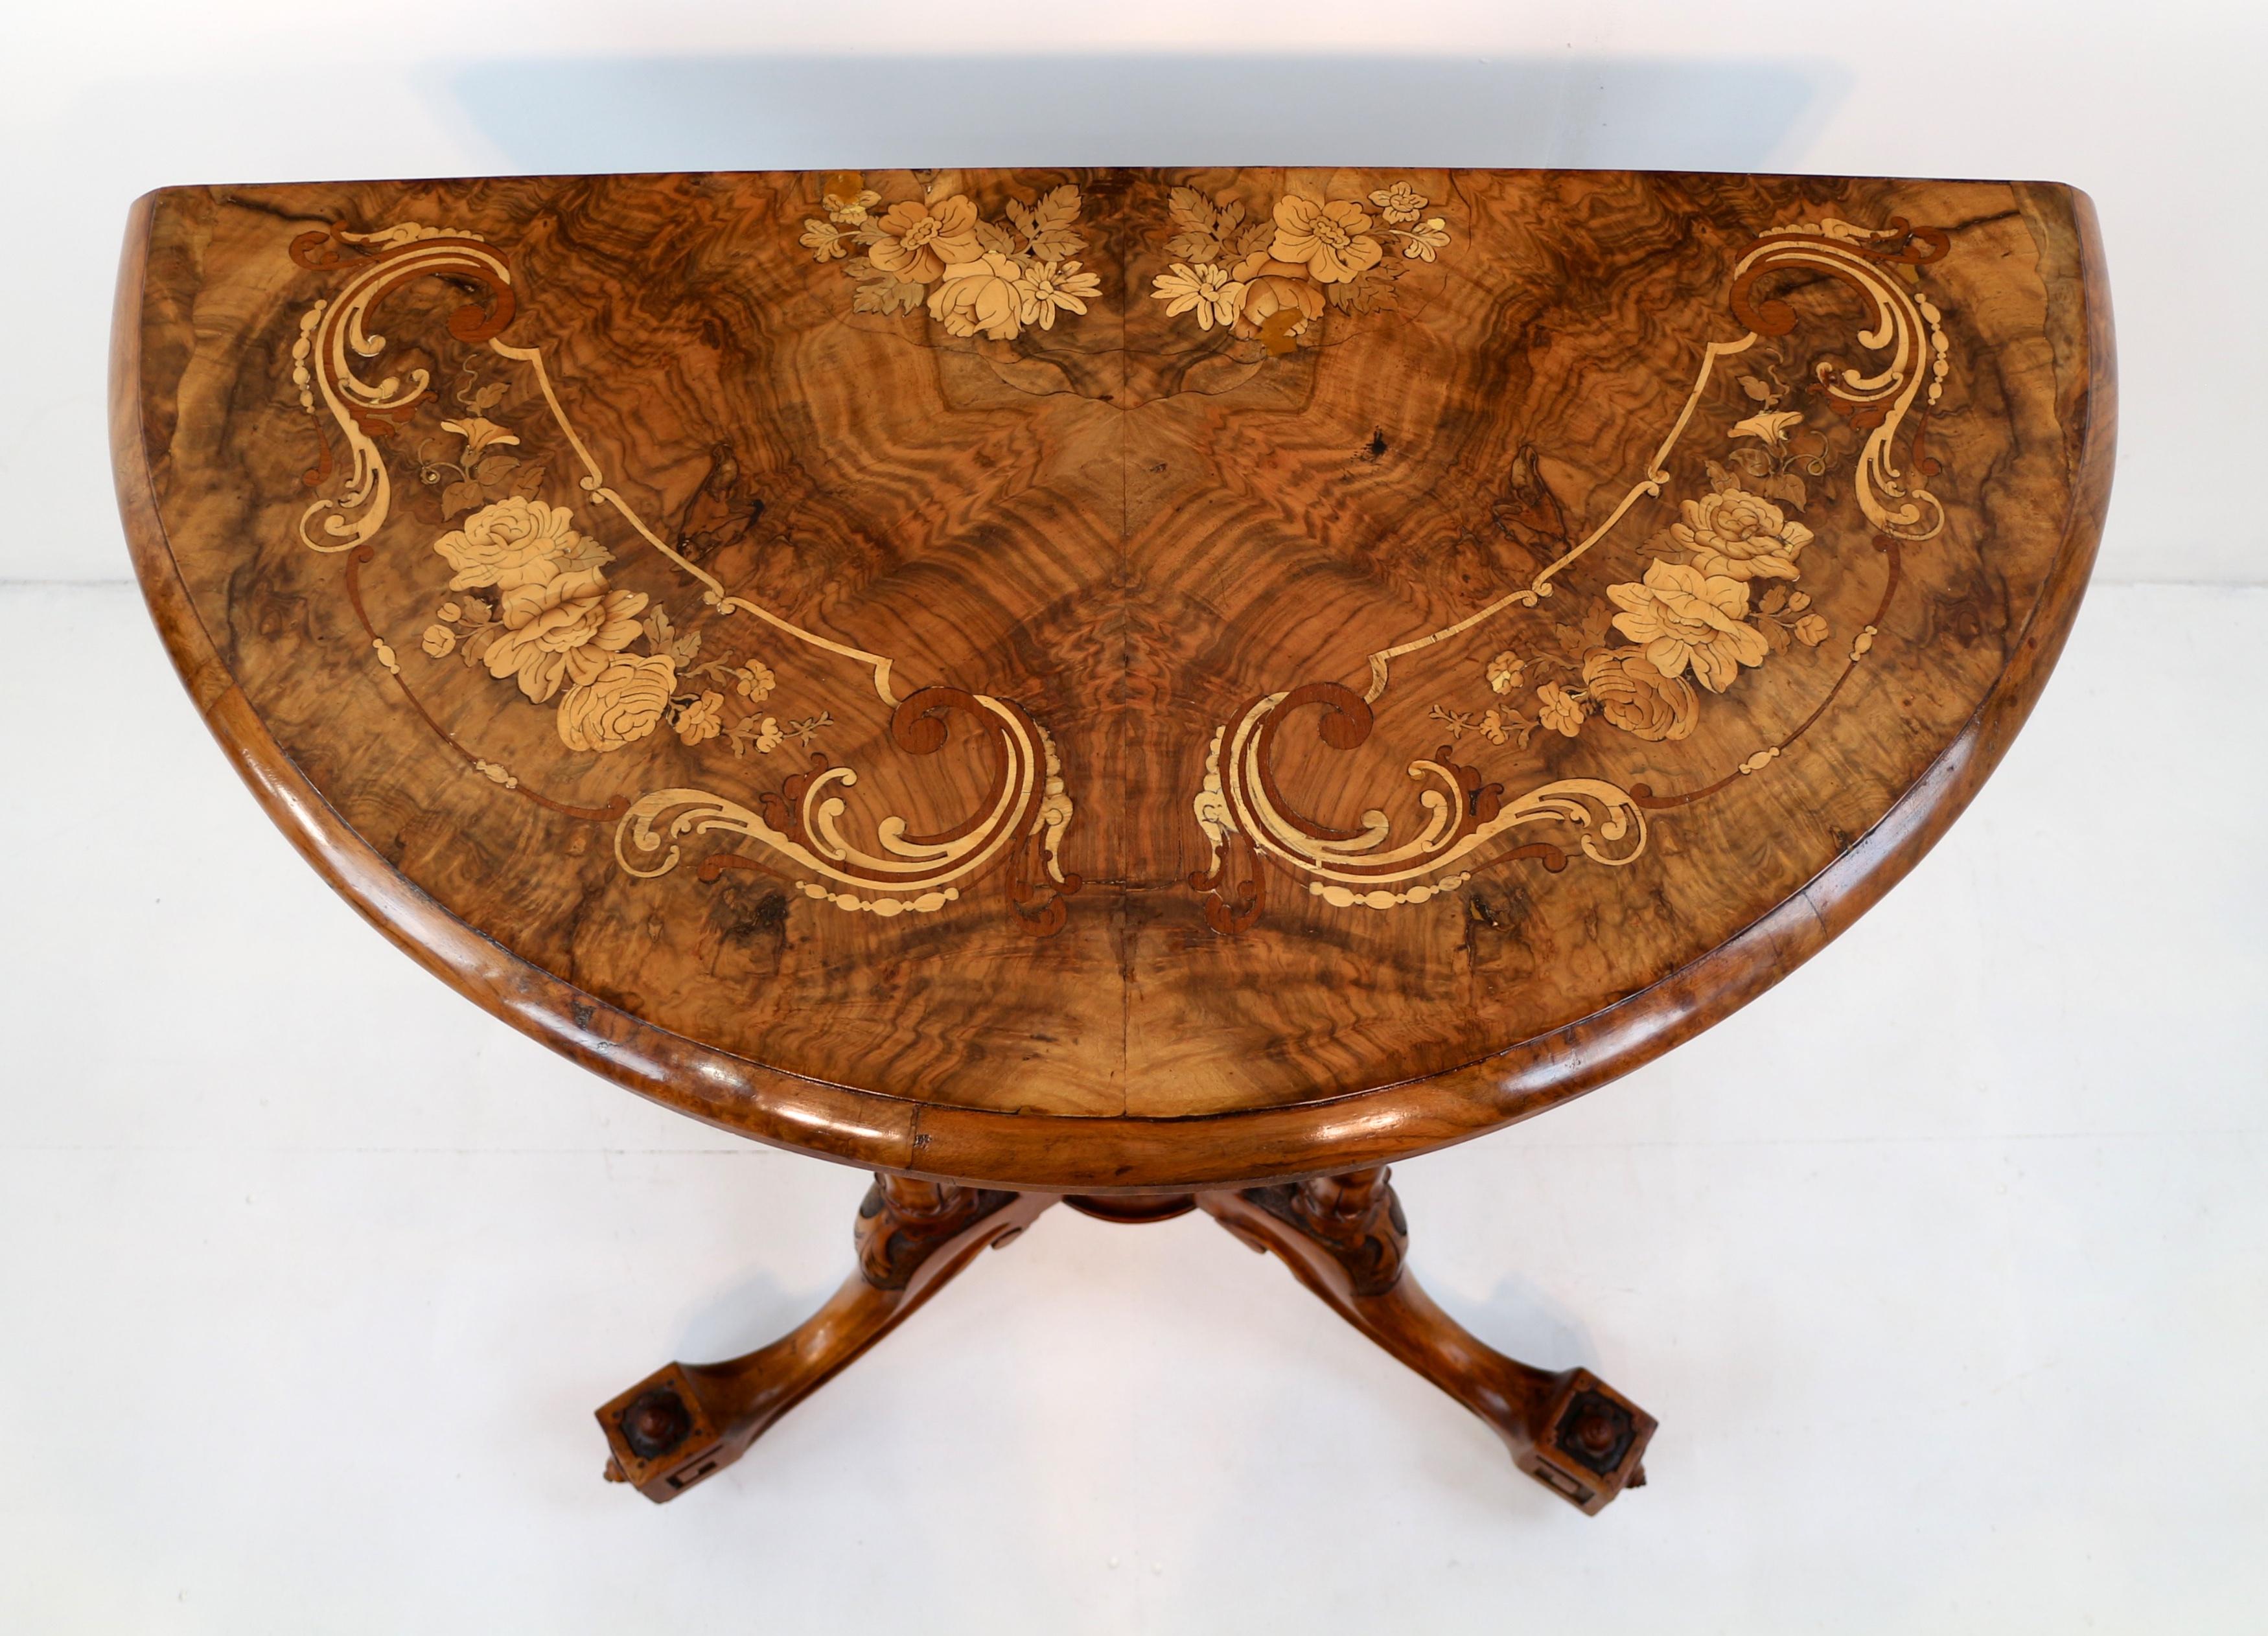 Antique English Victorian Burr Walnut & Floral Marquetry Demi-Lune Card Table For Sale 4